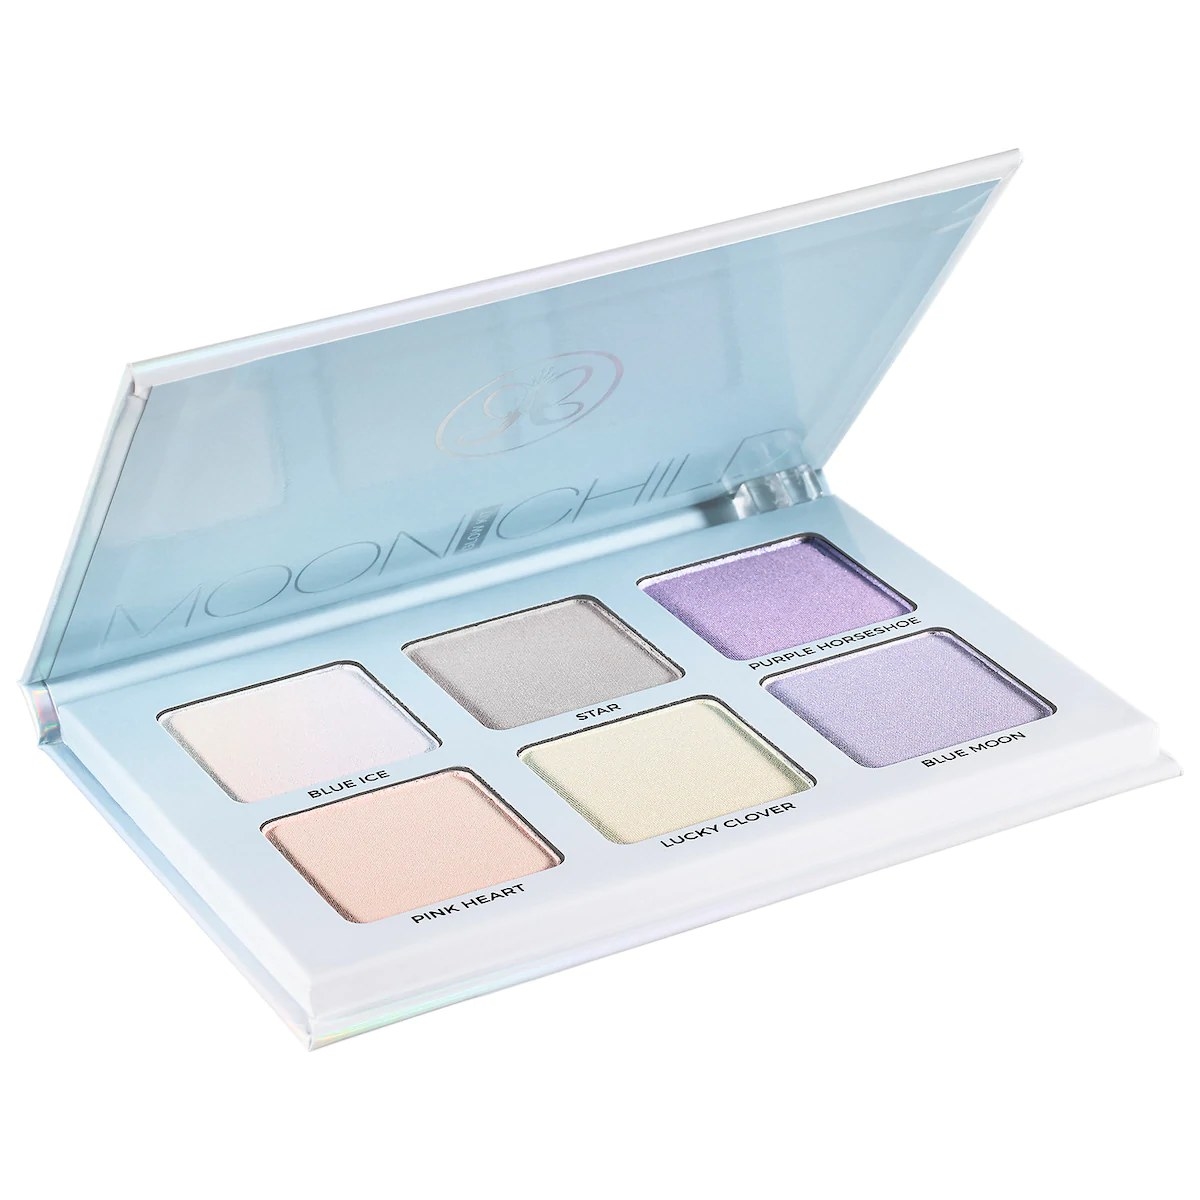 The glow kit with six pastel highlighter shades